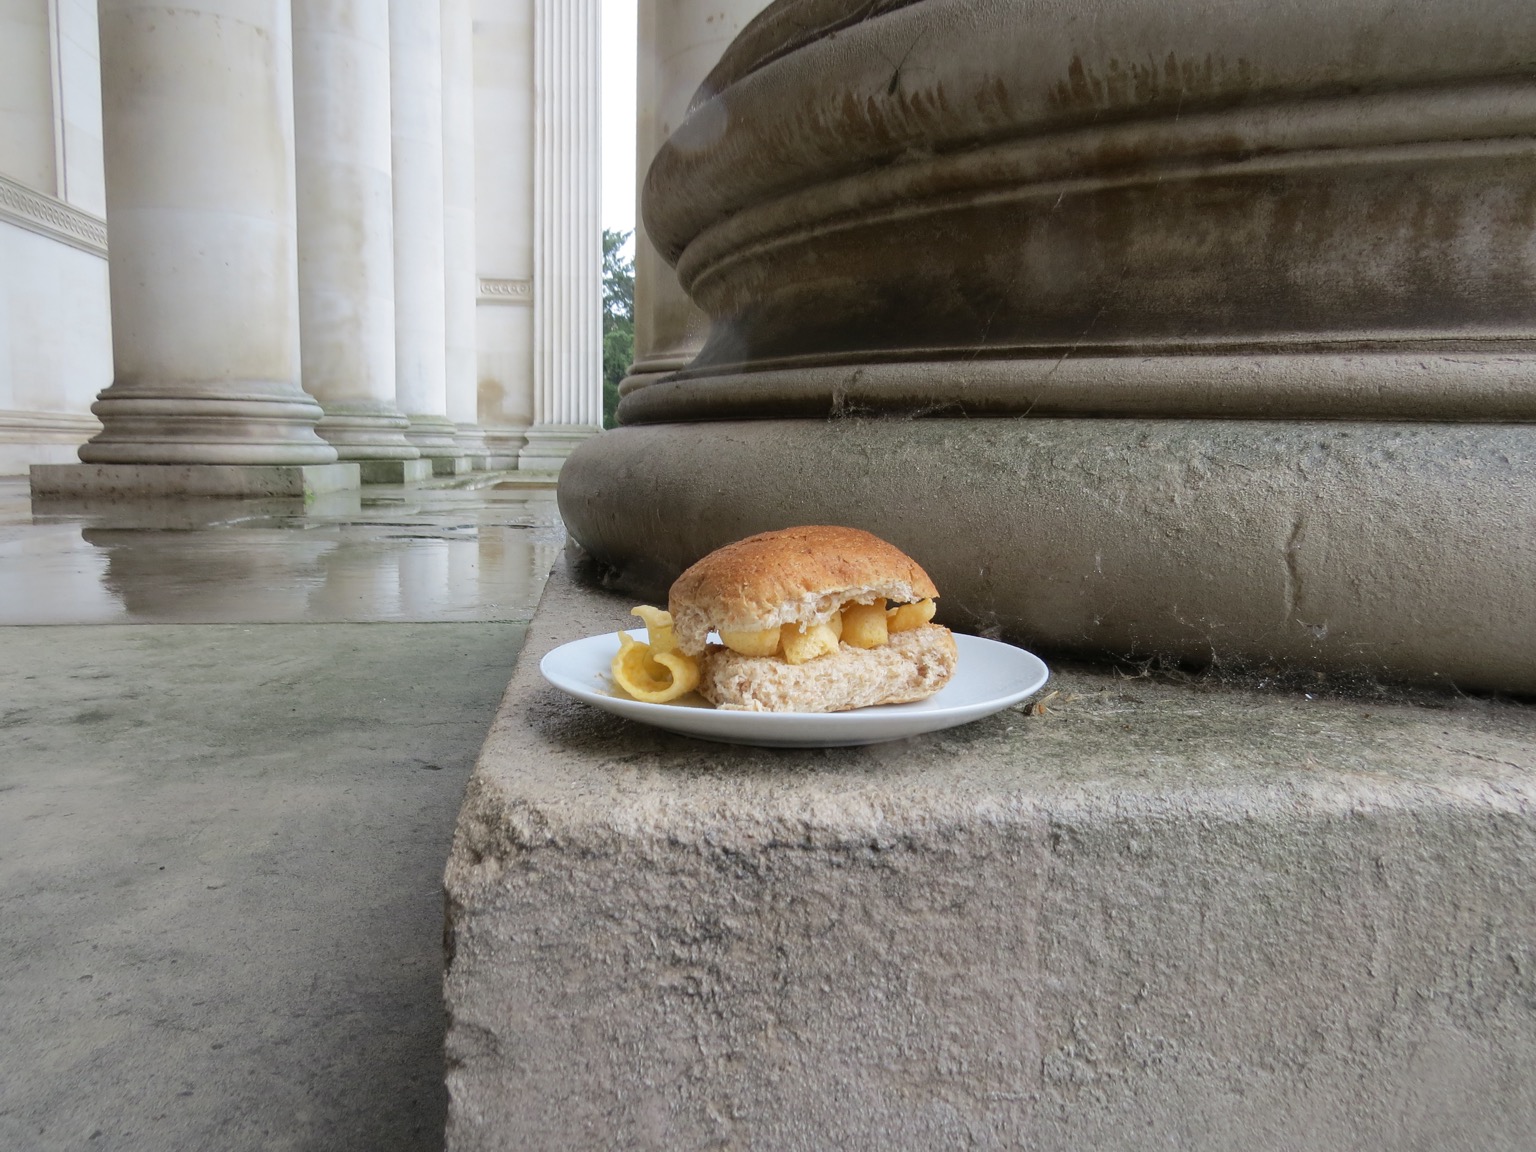 Brown Quavers roll at the foot of a stone column